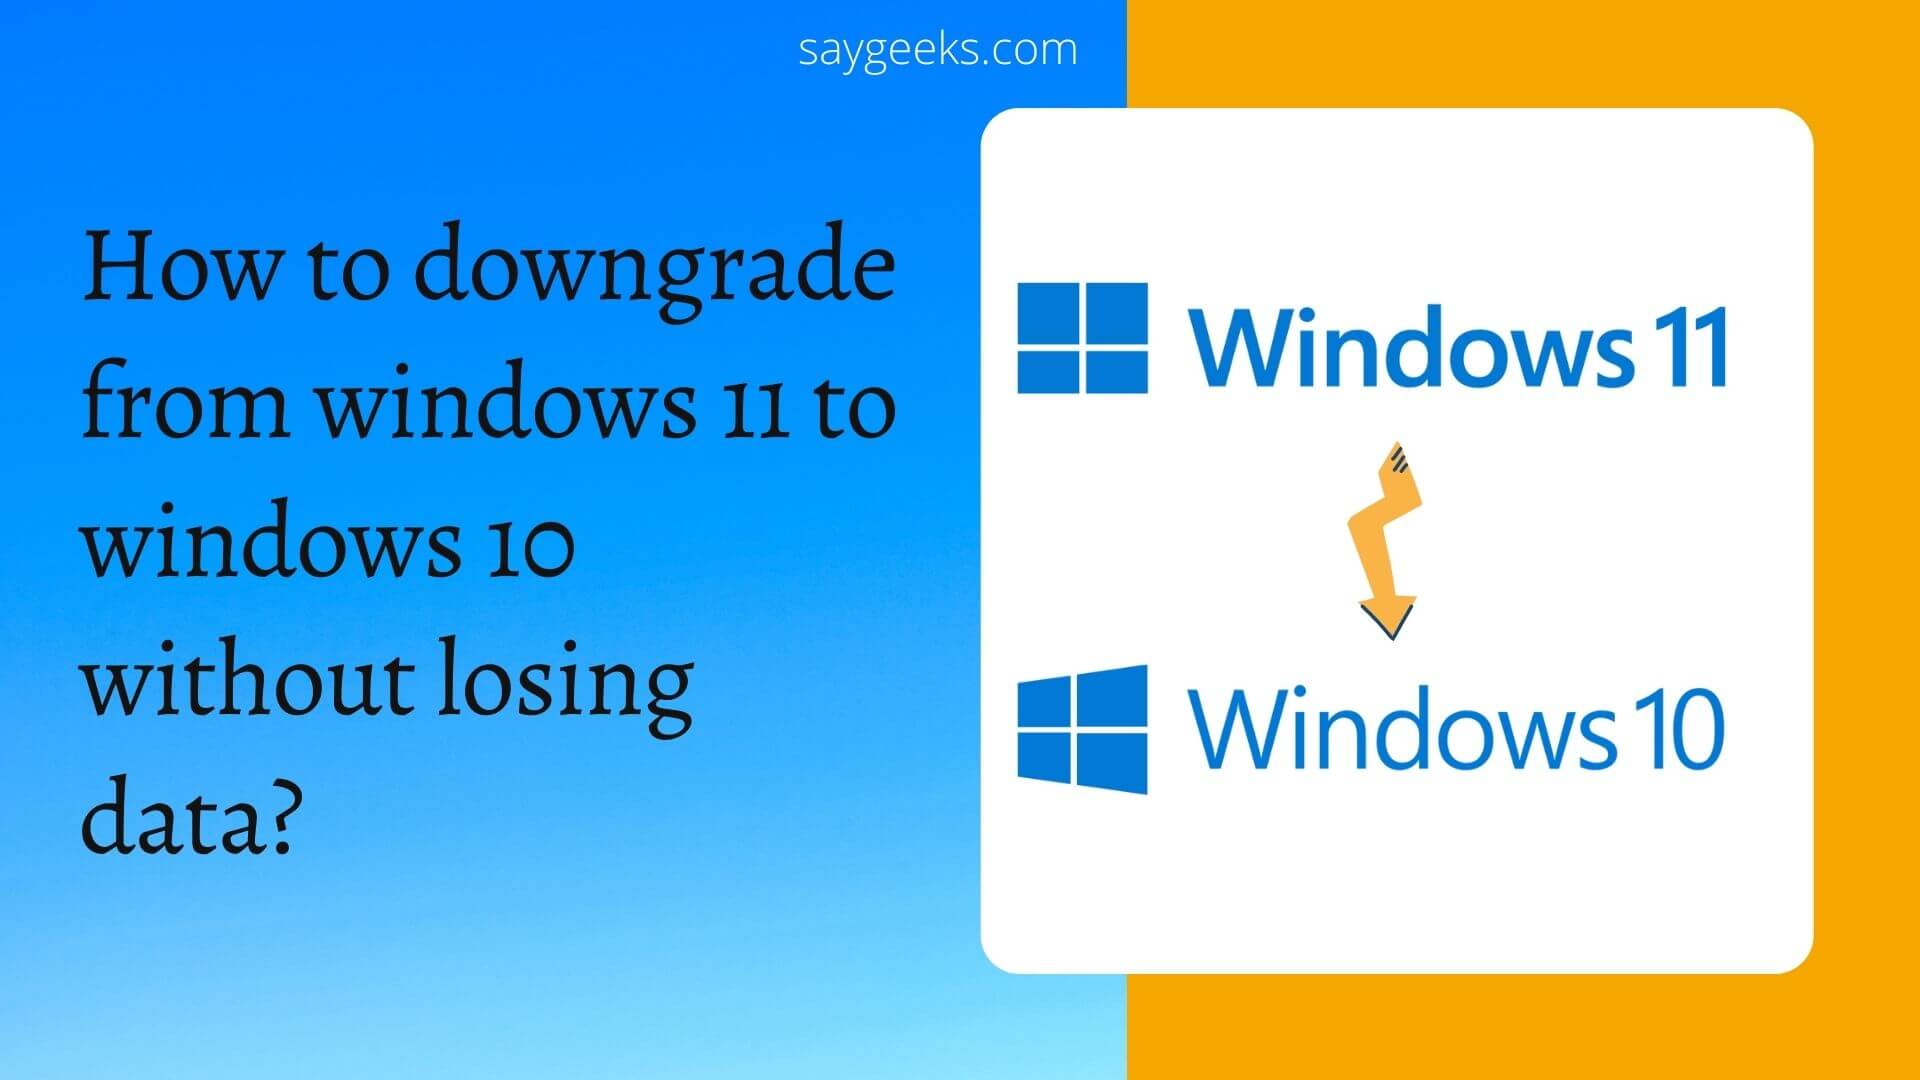 How to downgrade from windows 11 to windows 10 without losing data1